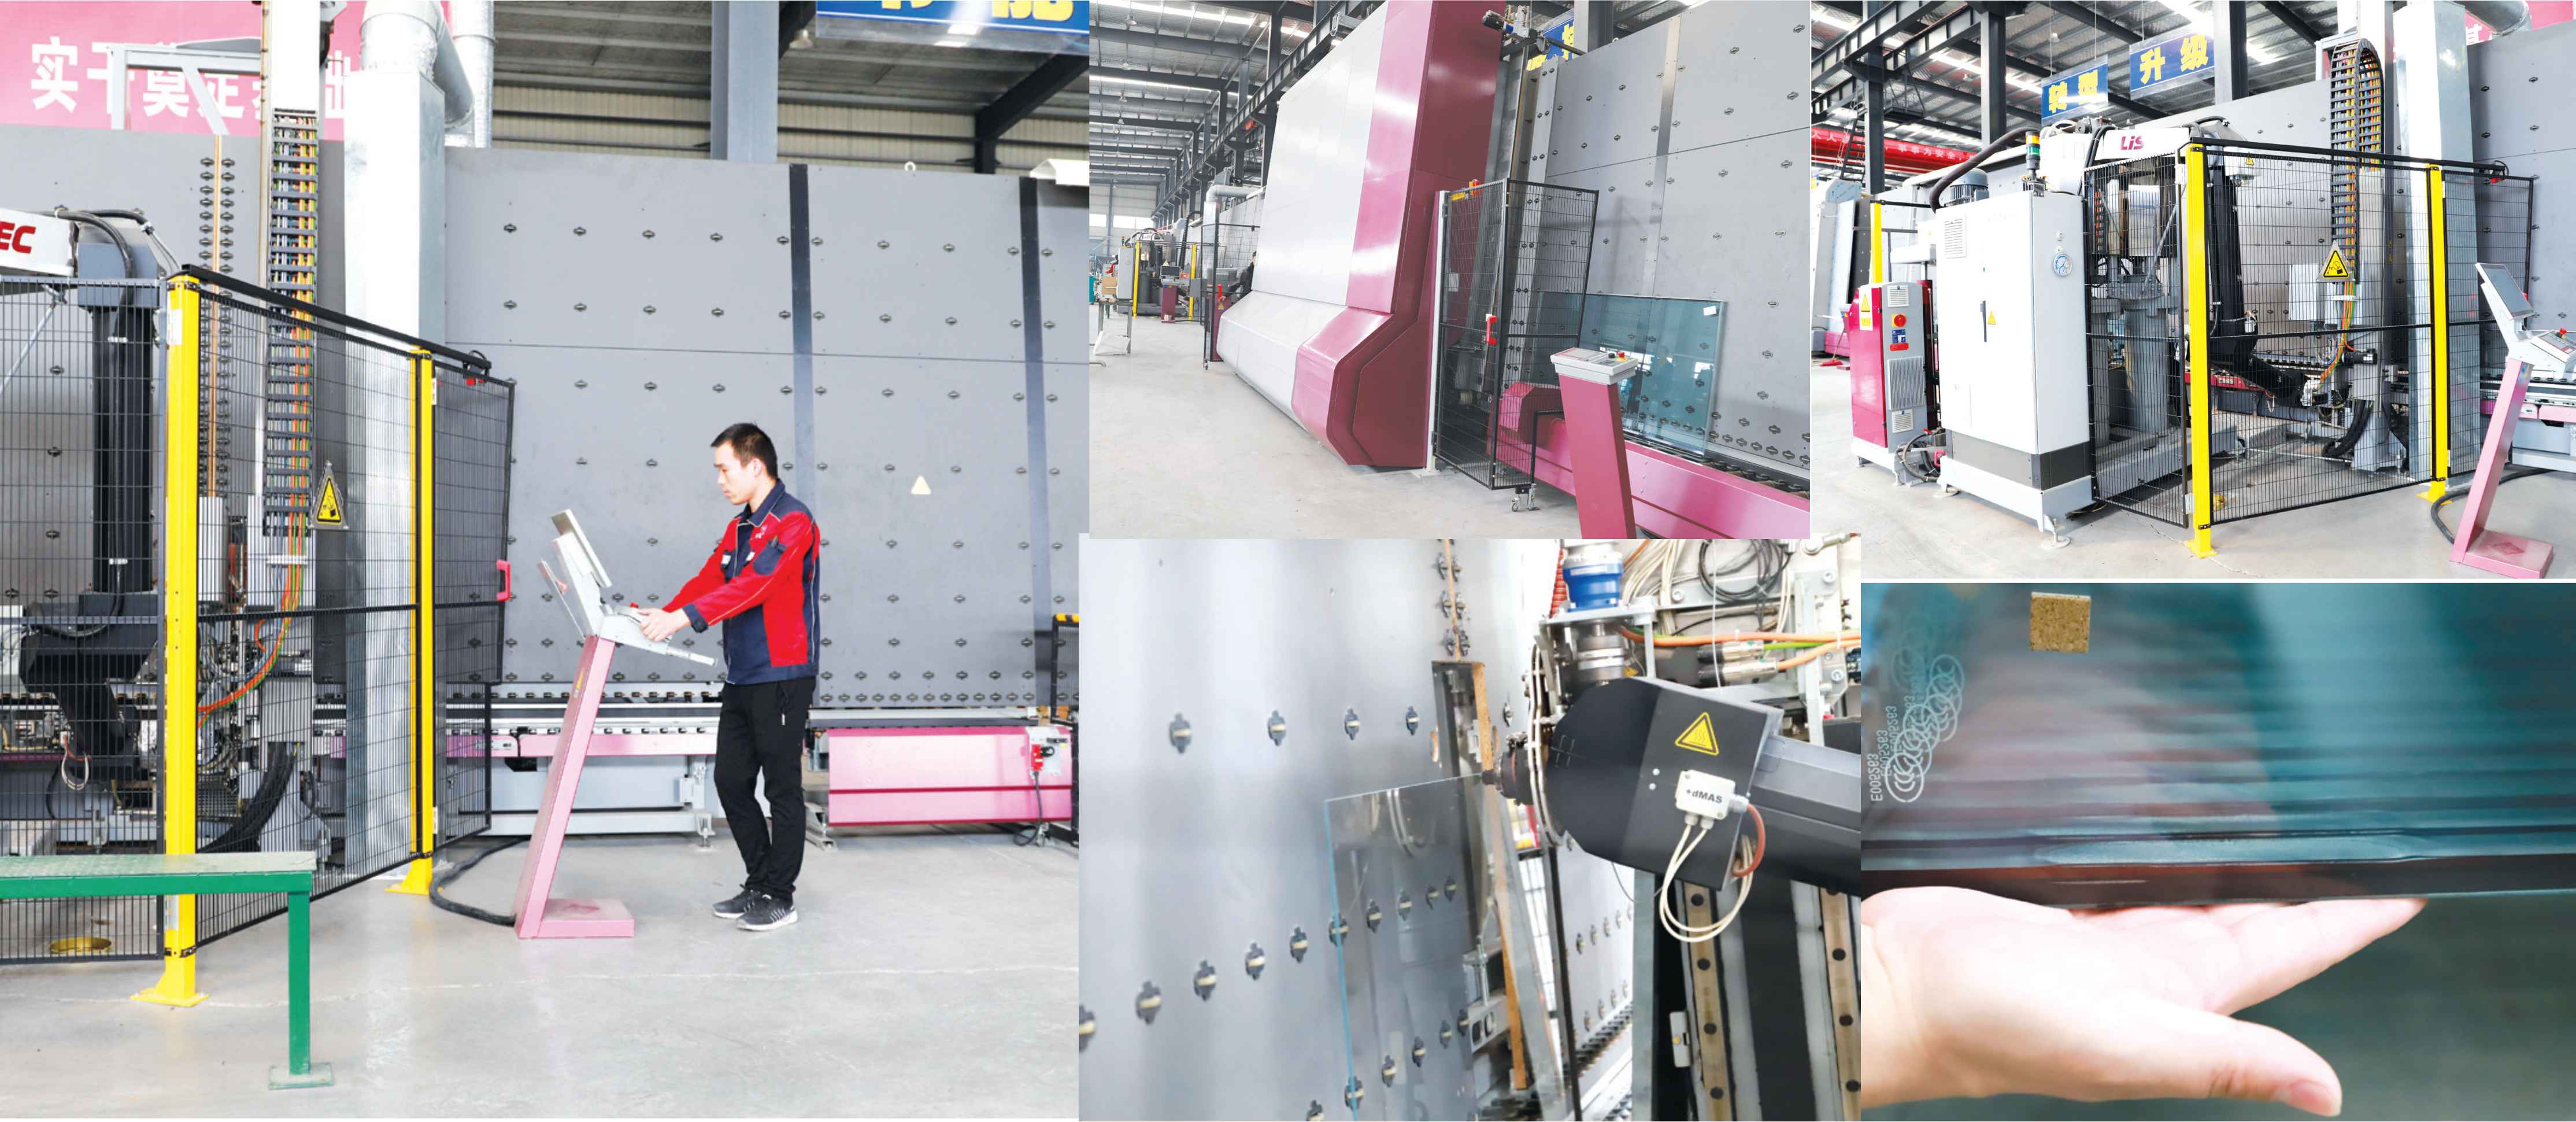 How Shandong Penghao Glass scripted success in China’s glass industry